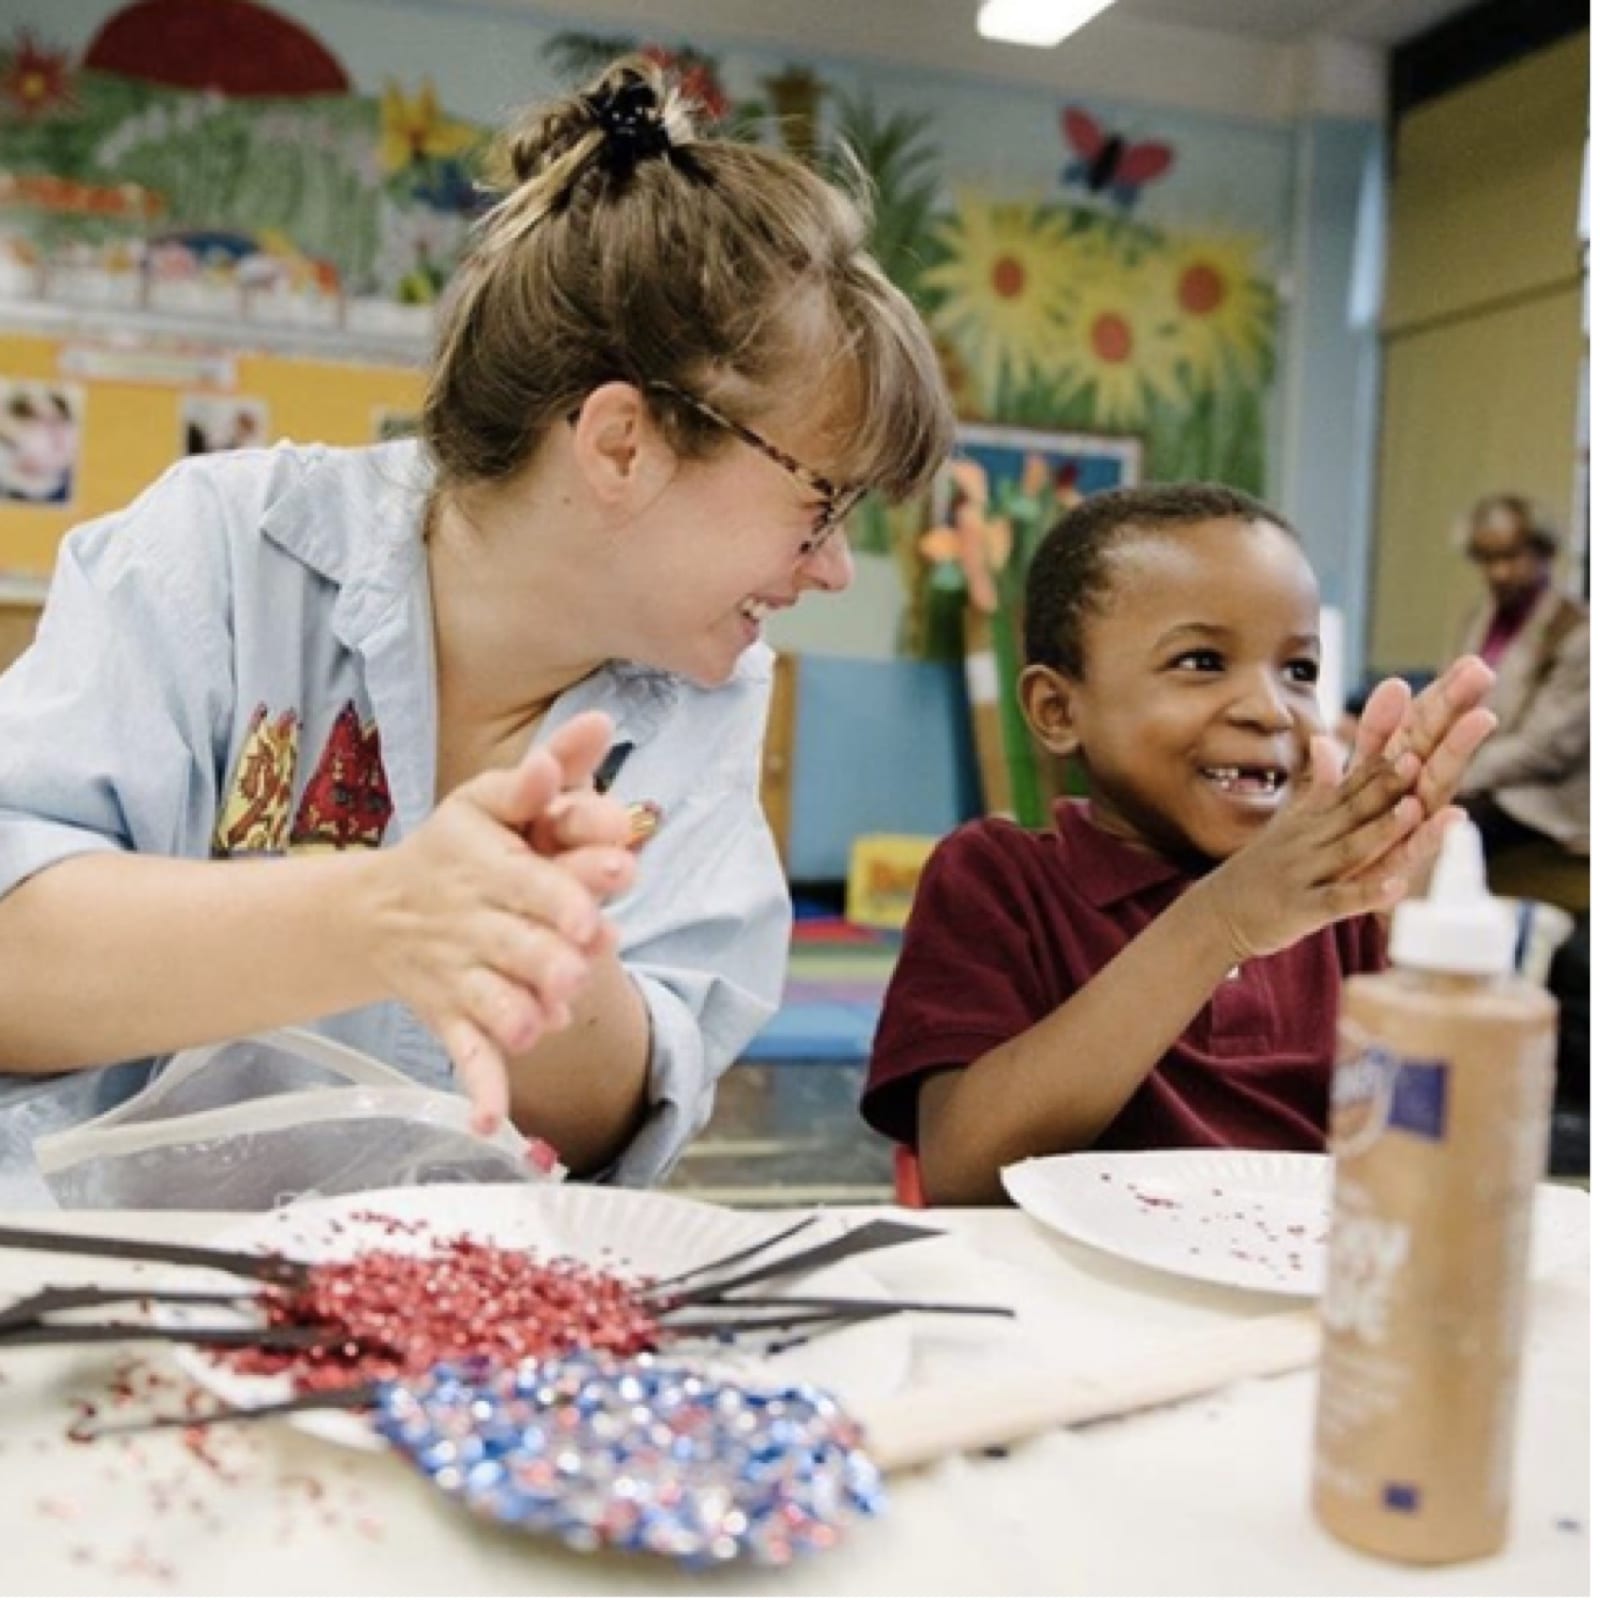 Teaching artist and young student sit at a table and rub glitter between their hands, smiling.